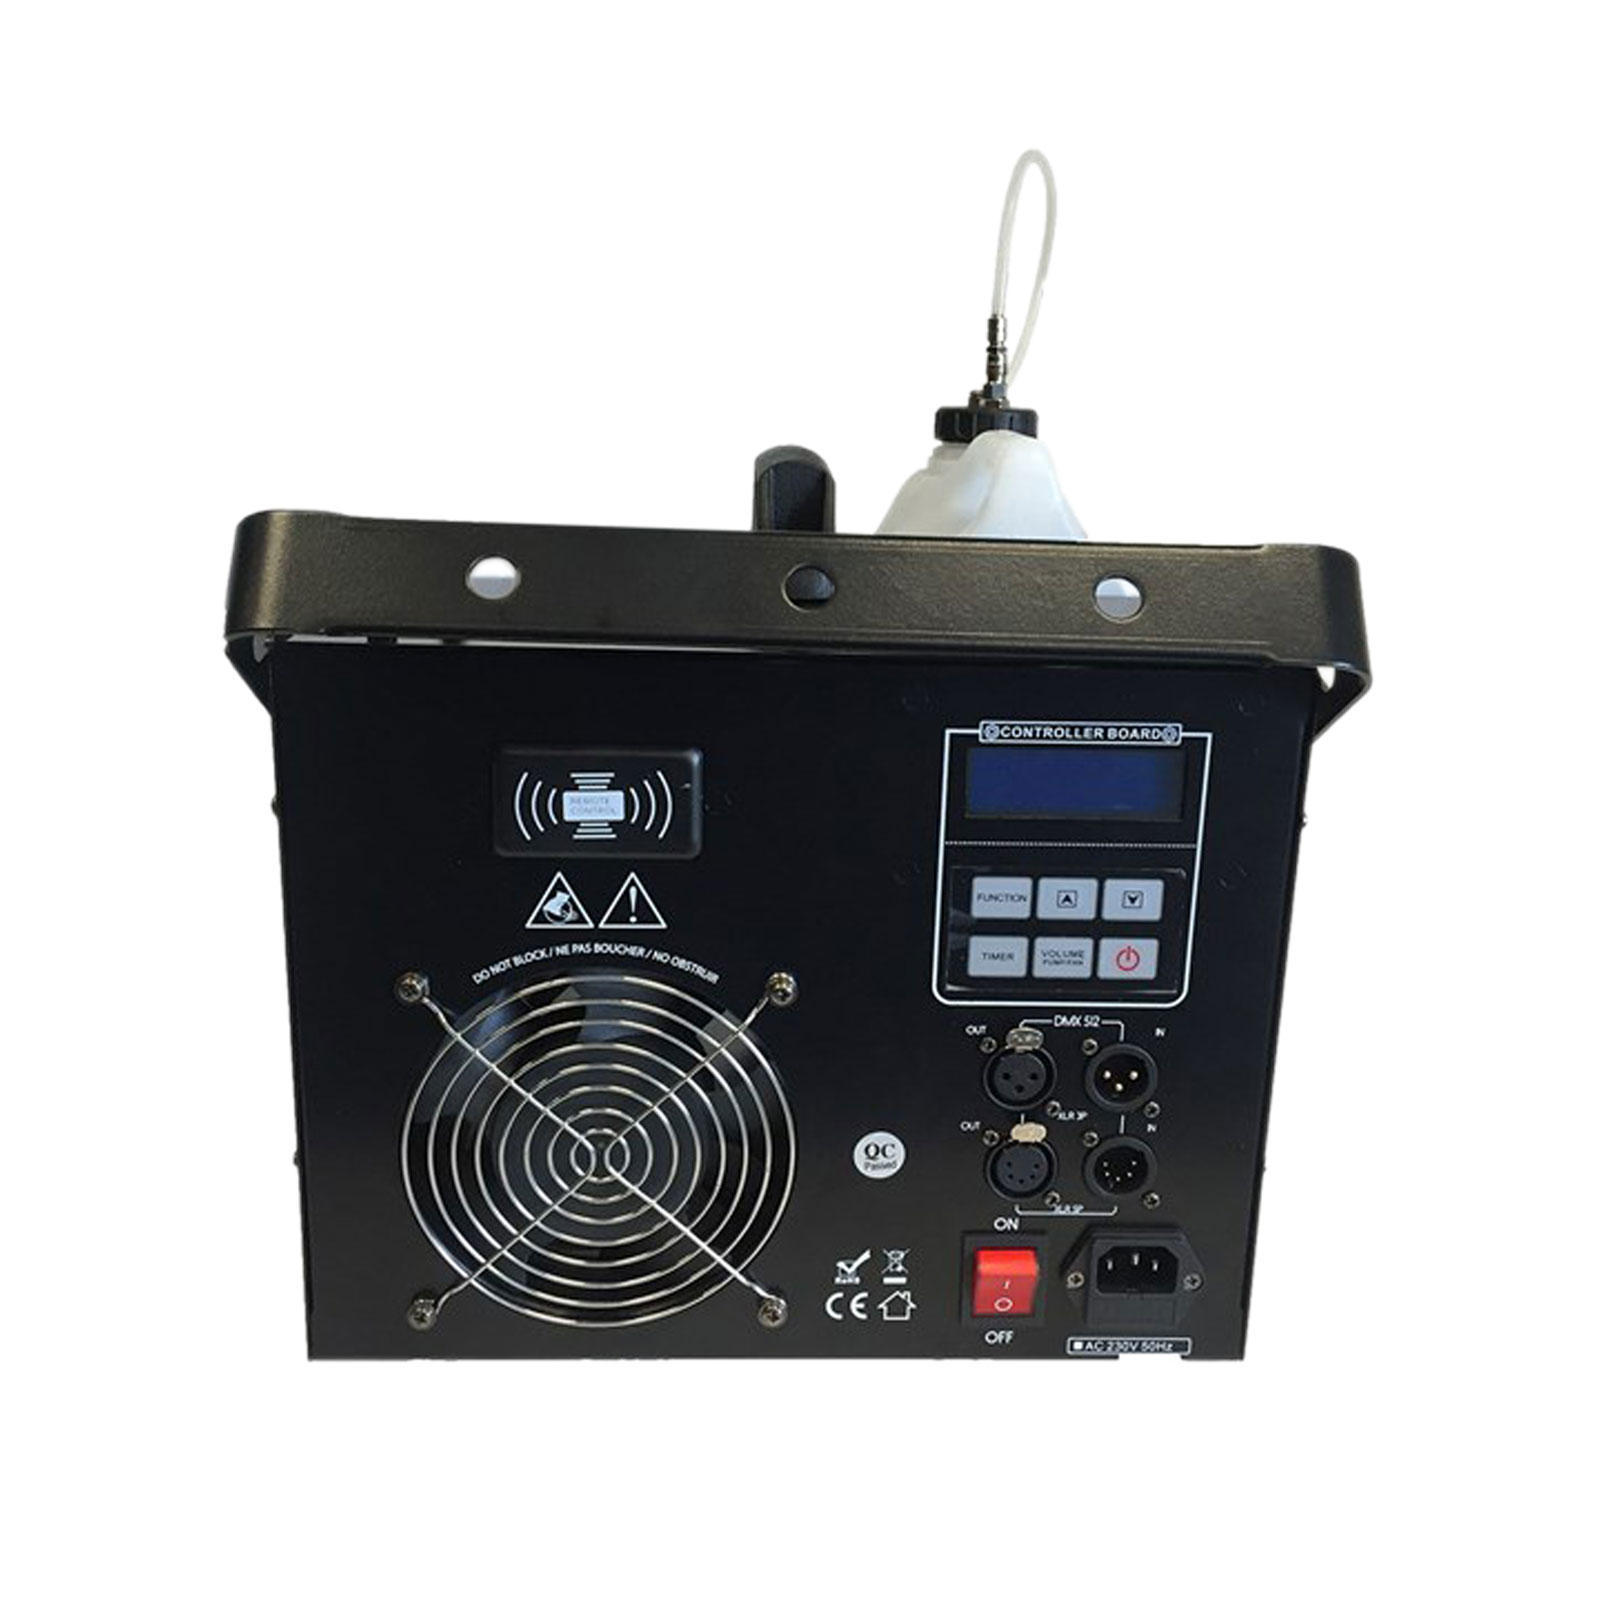 Dune 1500w Haze Machine with Integral Timer and Wireless Remote